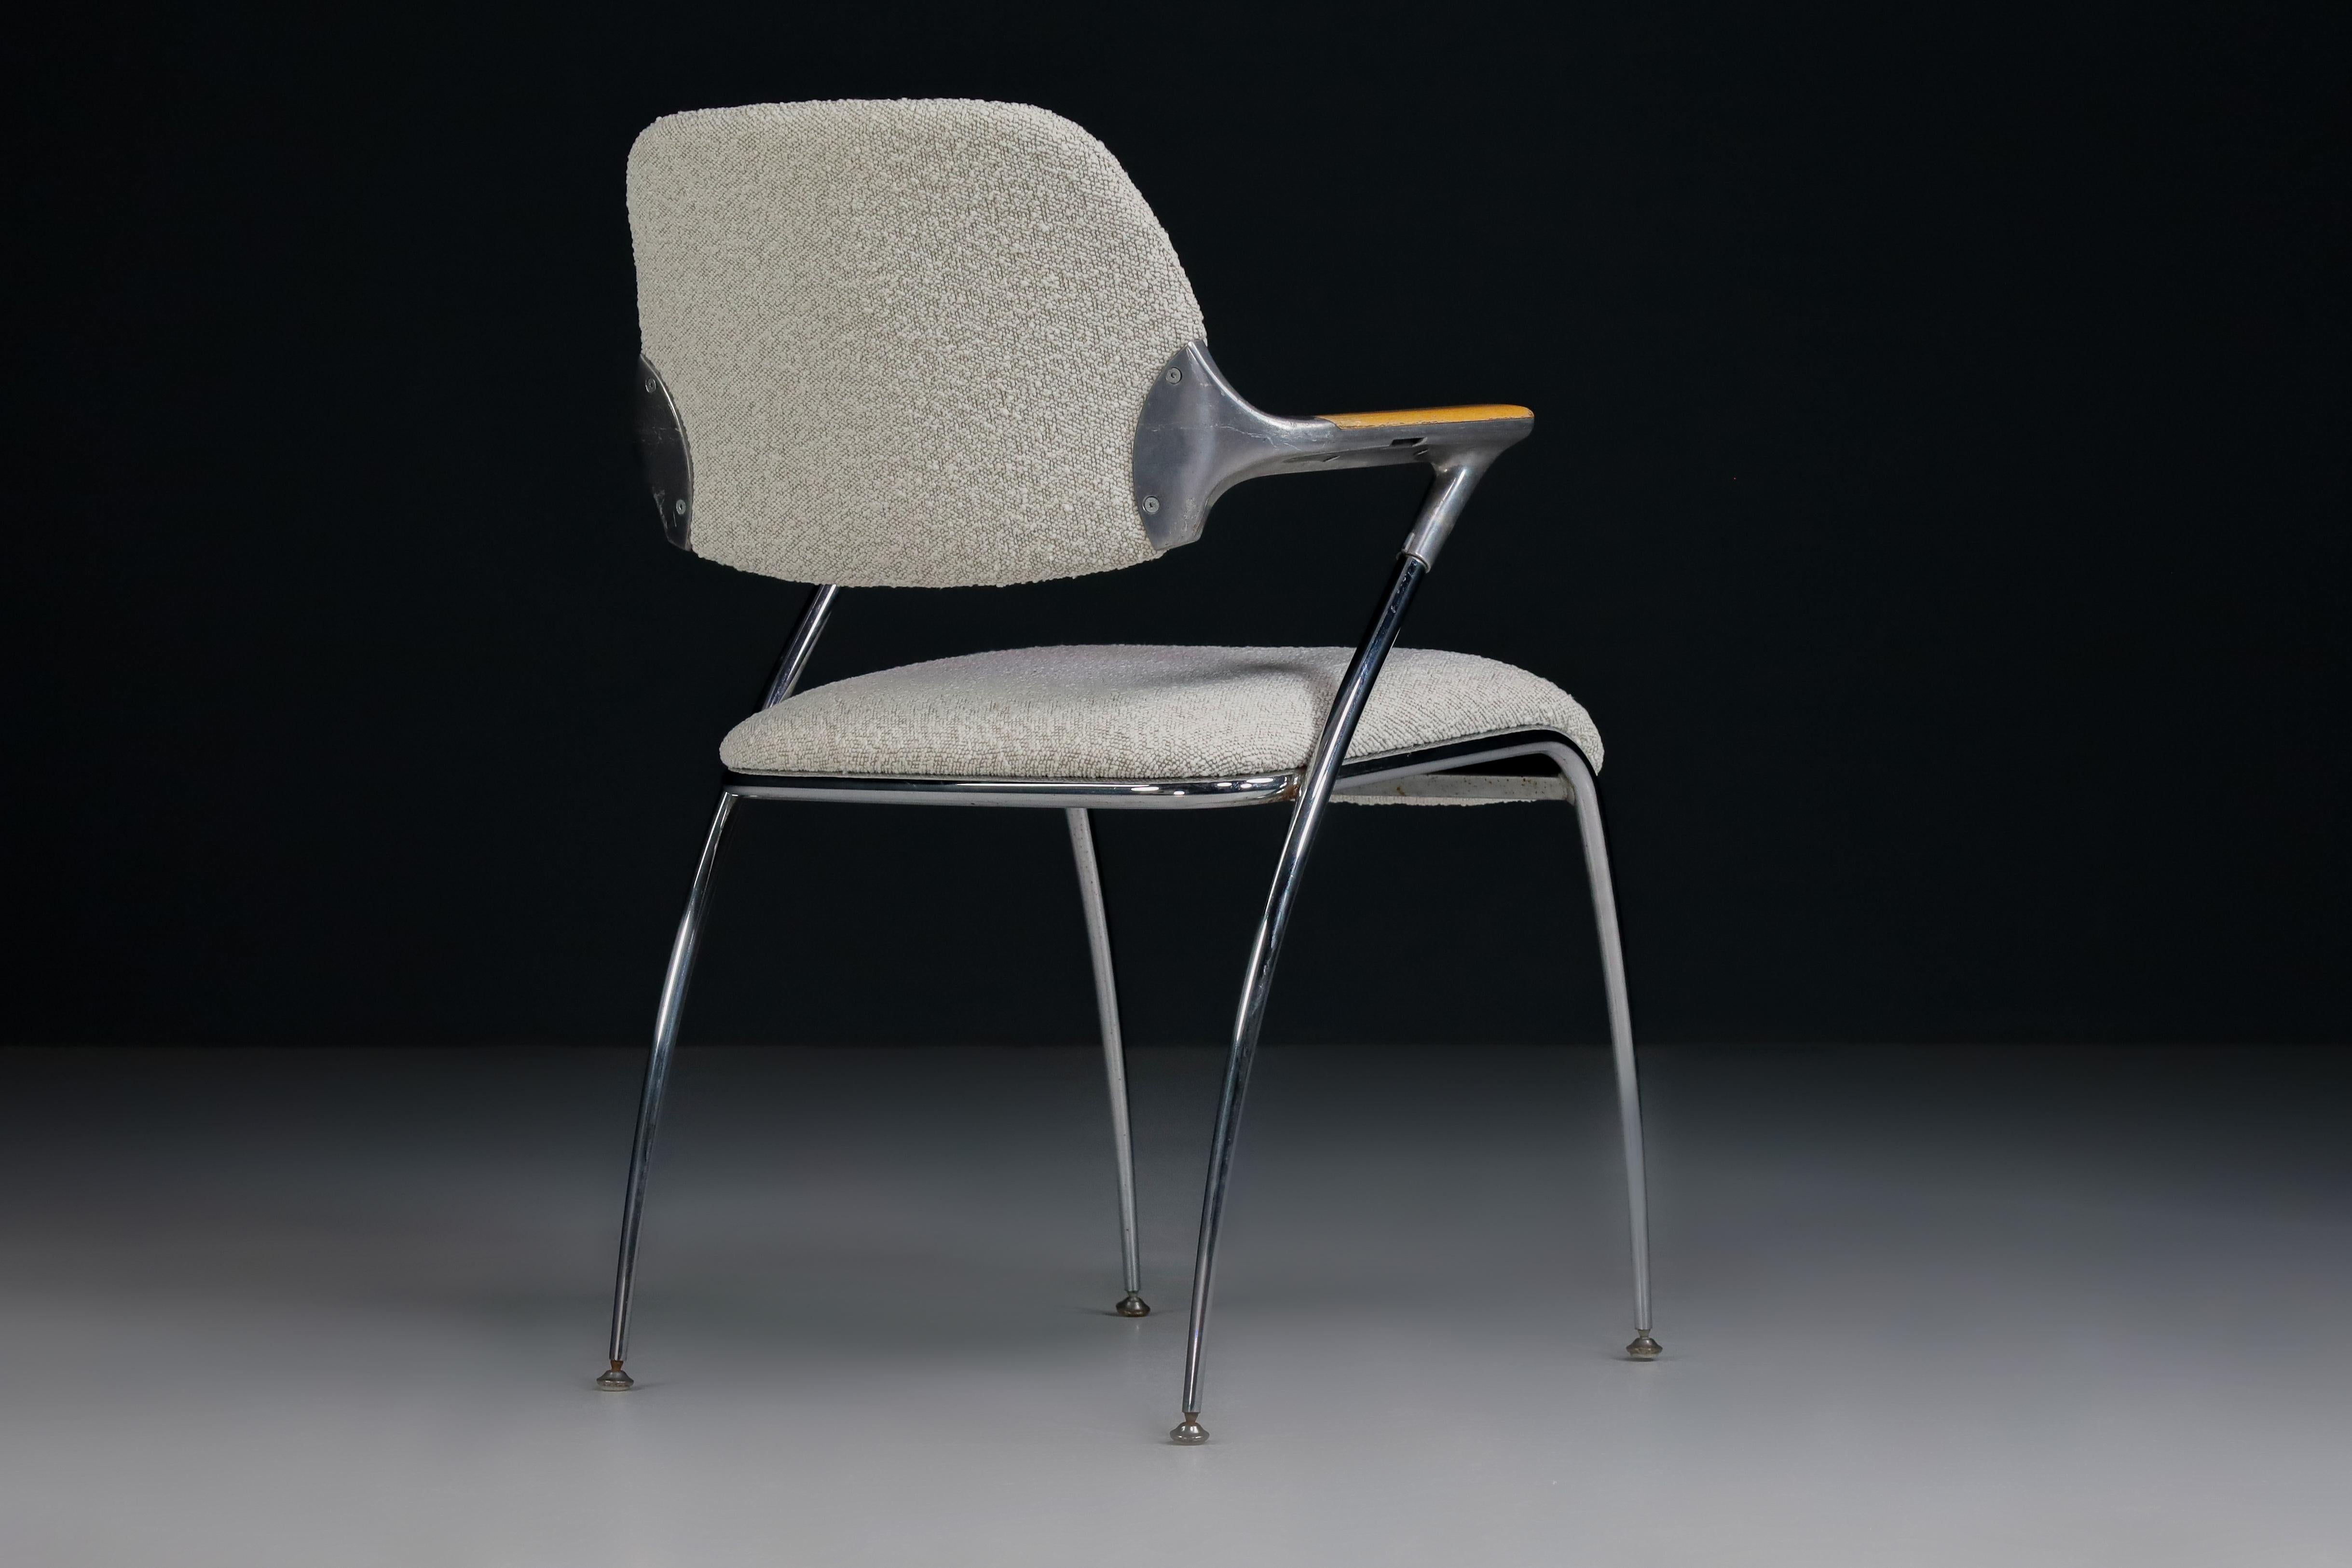 Aluminum Francesco Zaccone for Thonet Golf Chairs in New Bouclé Upholstery, Germany 1970 For Sale